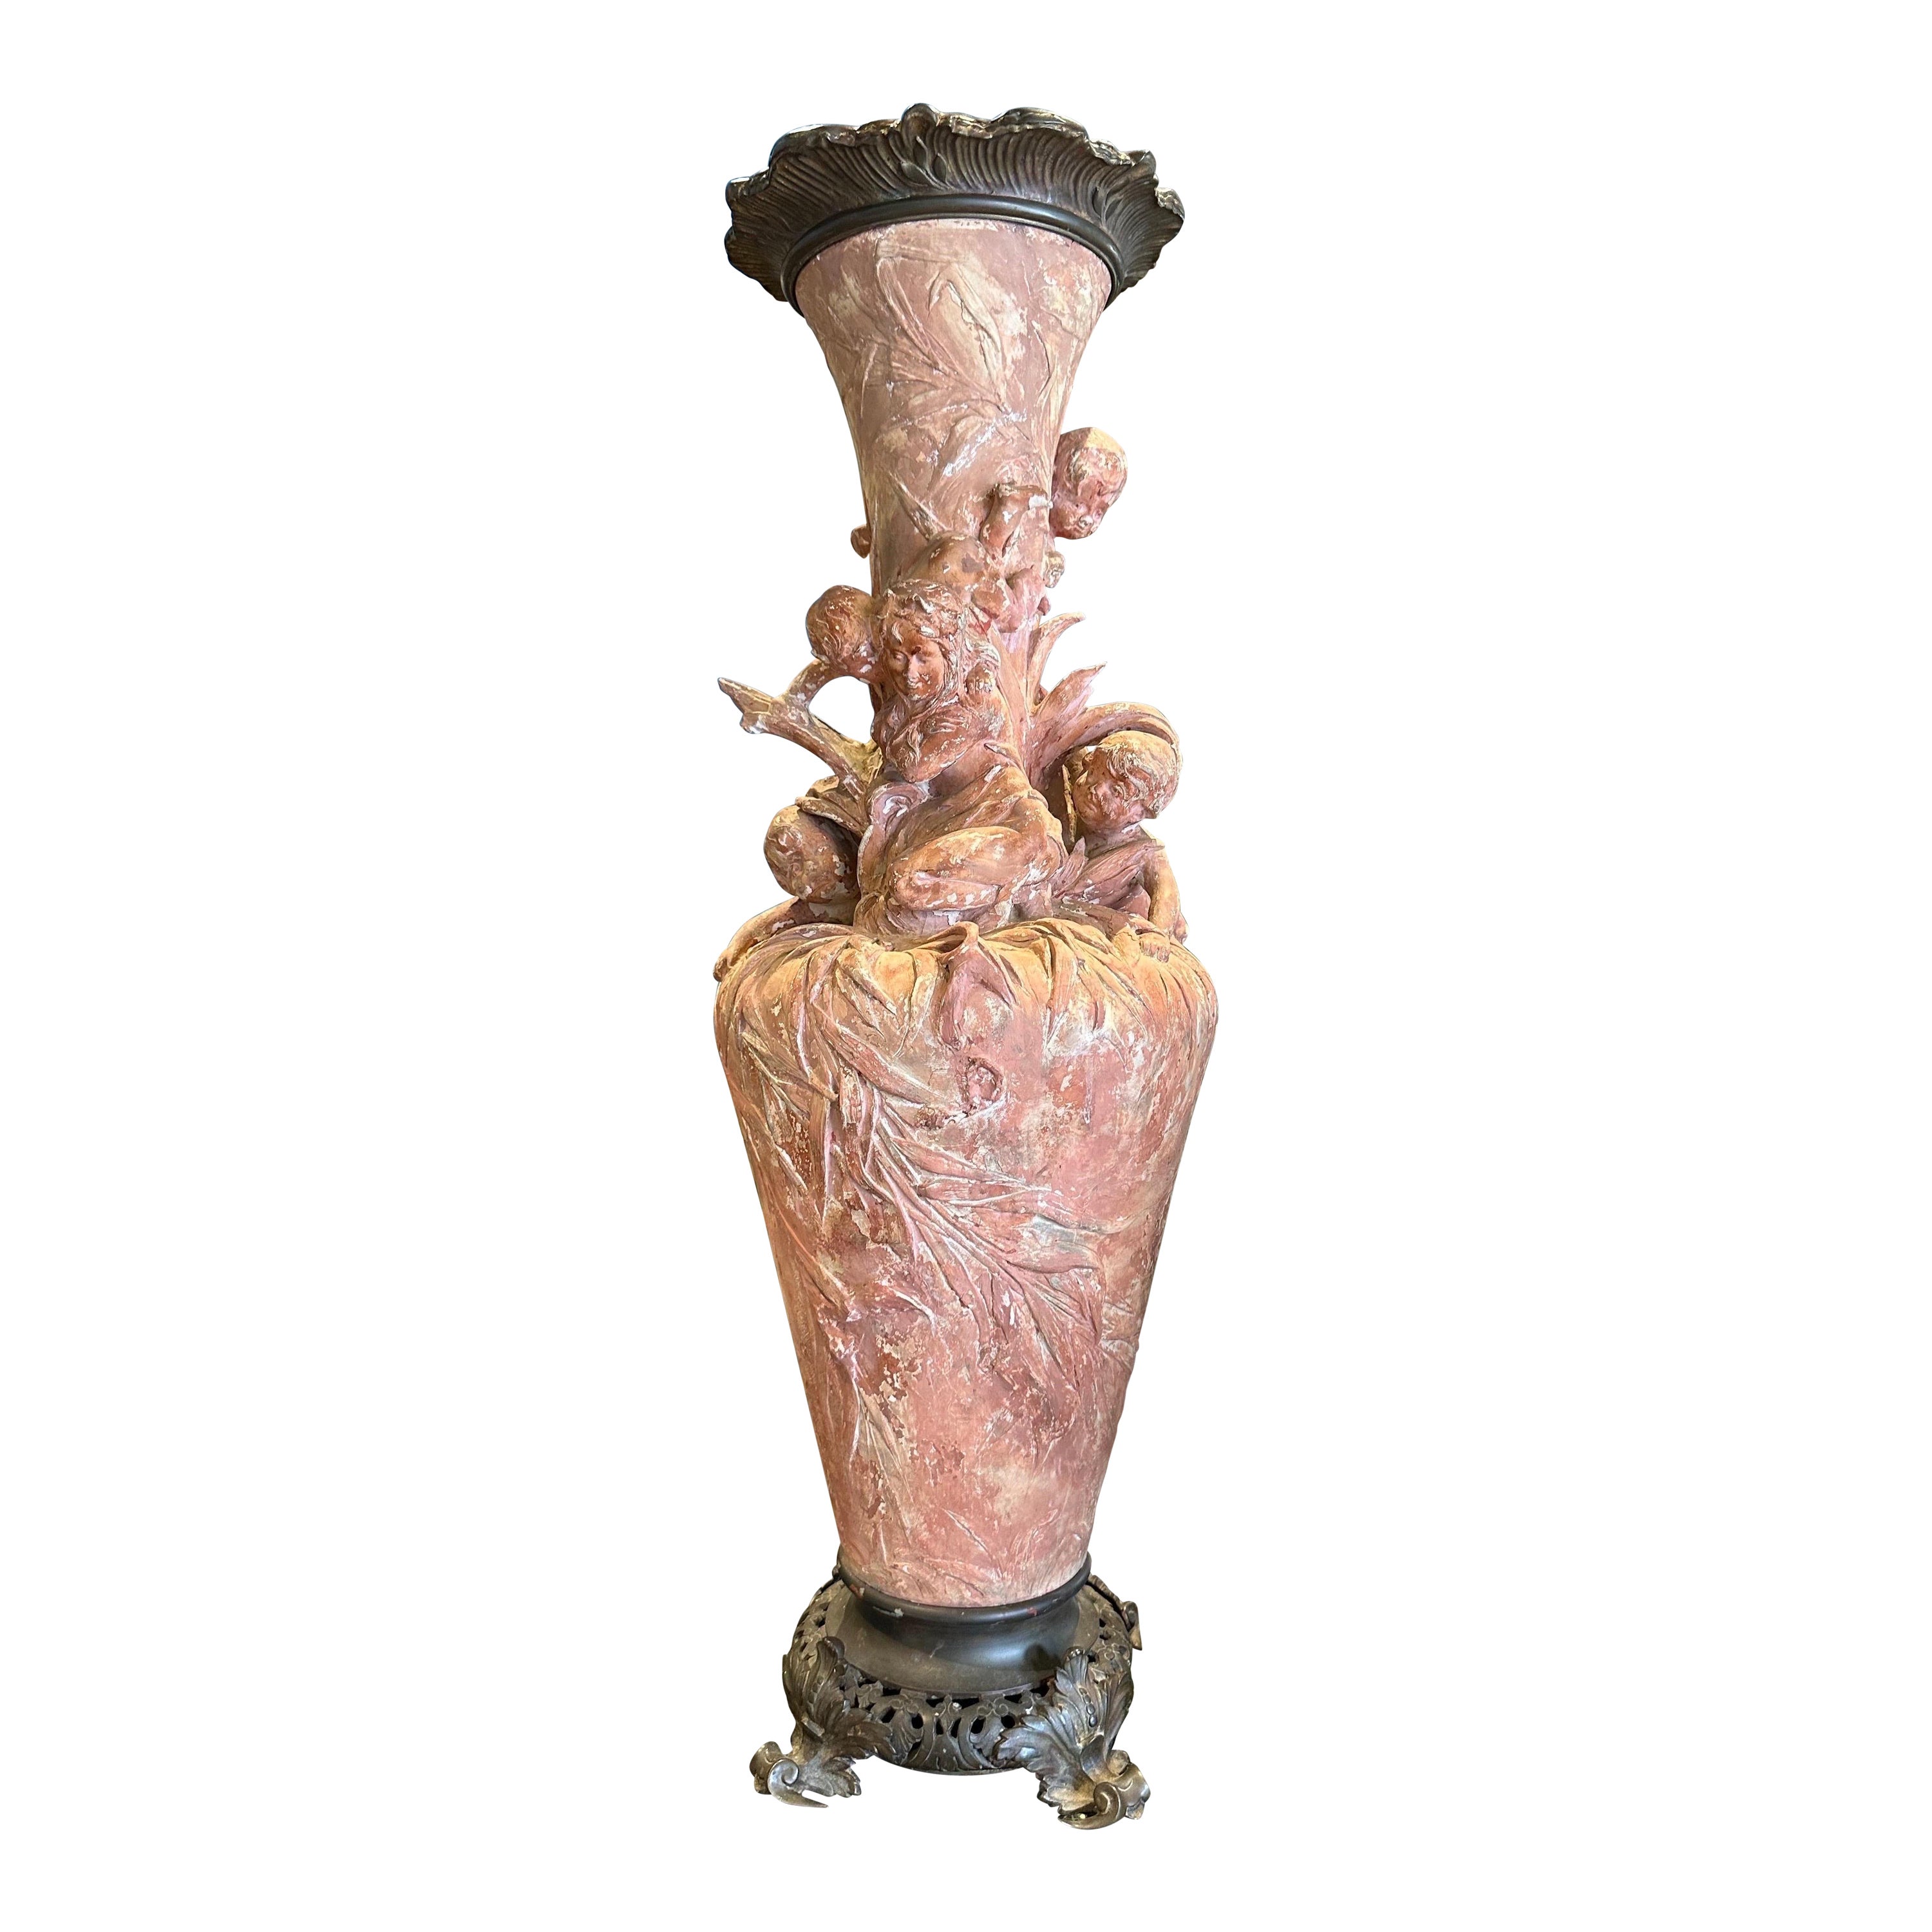 Art nouveau, significant historical vase, with bronze top and base 